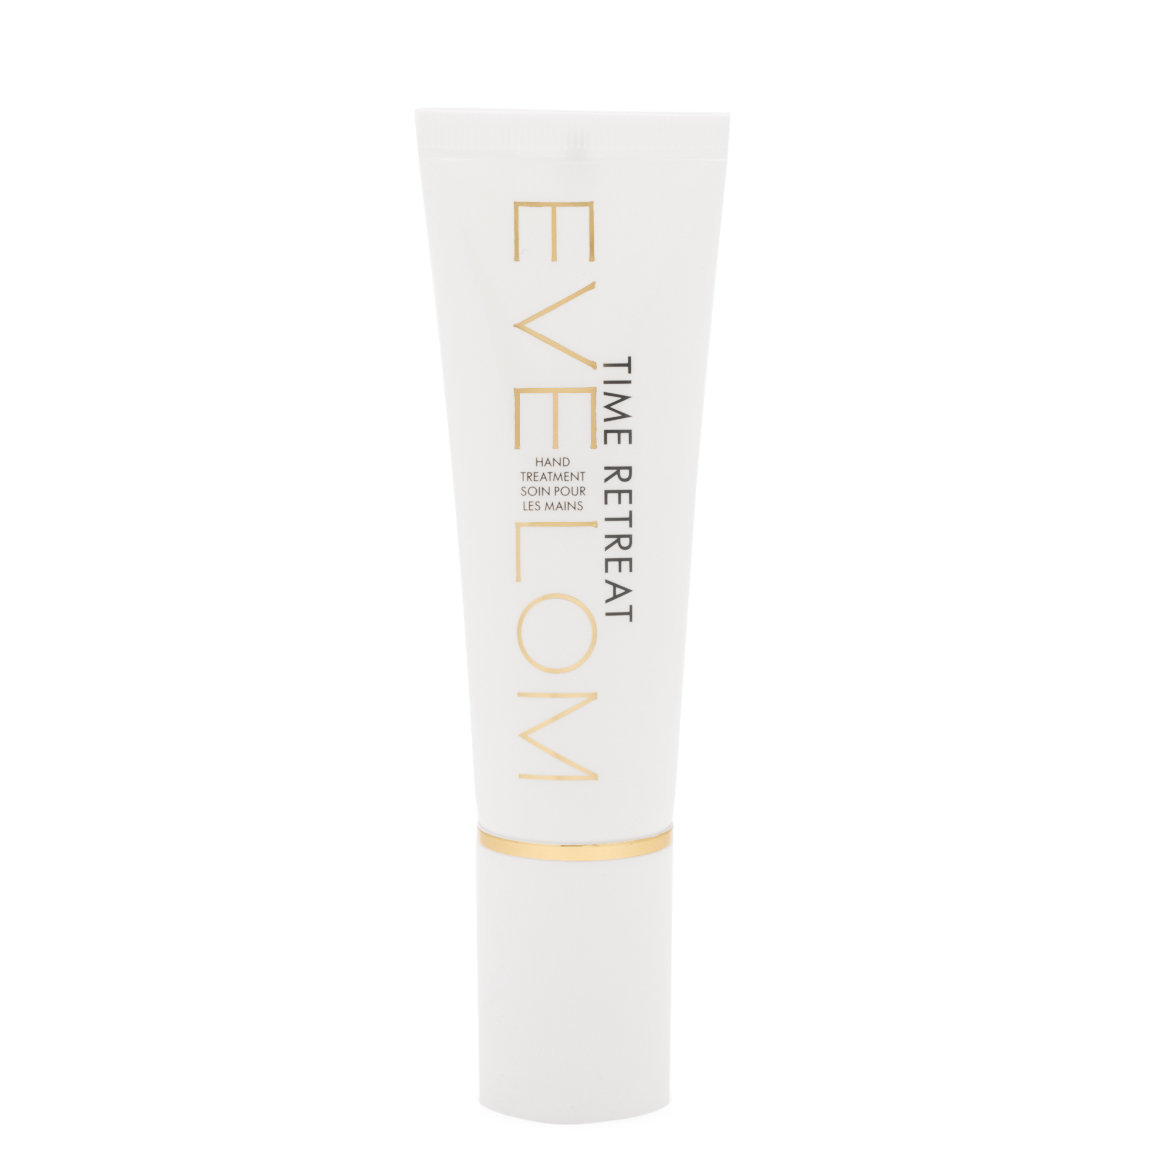 EVE LOM Time Retreat Hand Treatment alternative view 1 - product swatch.